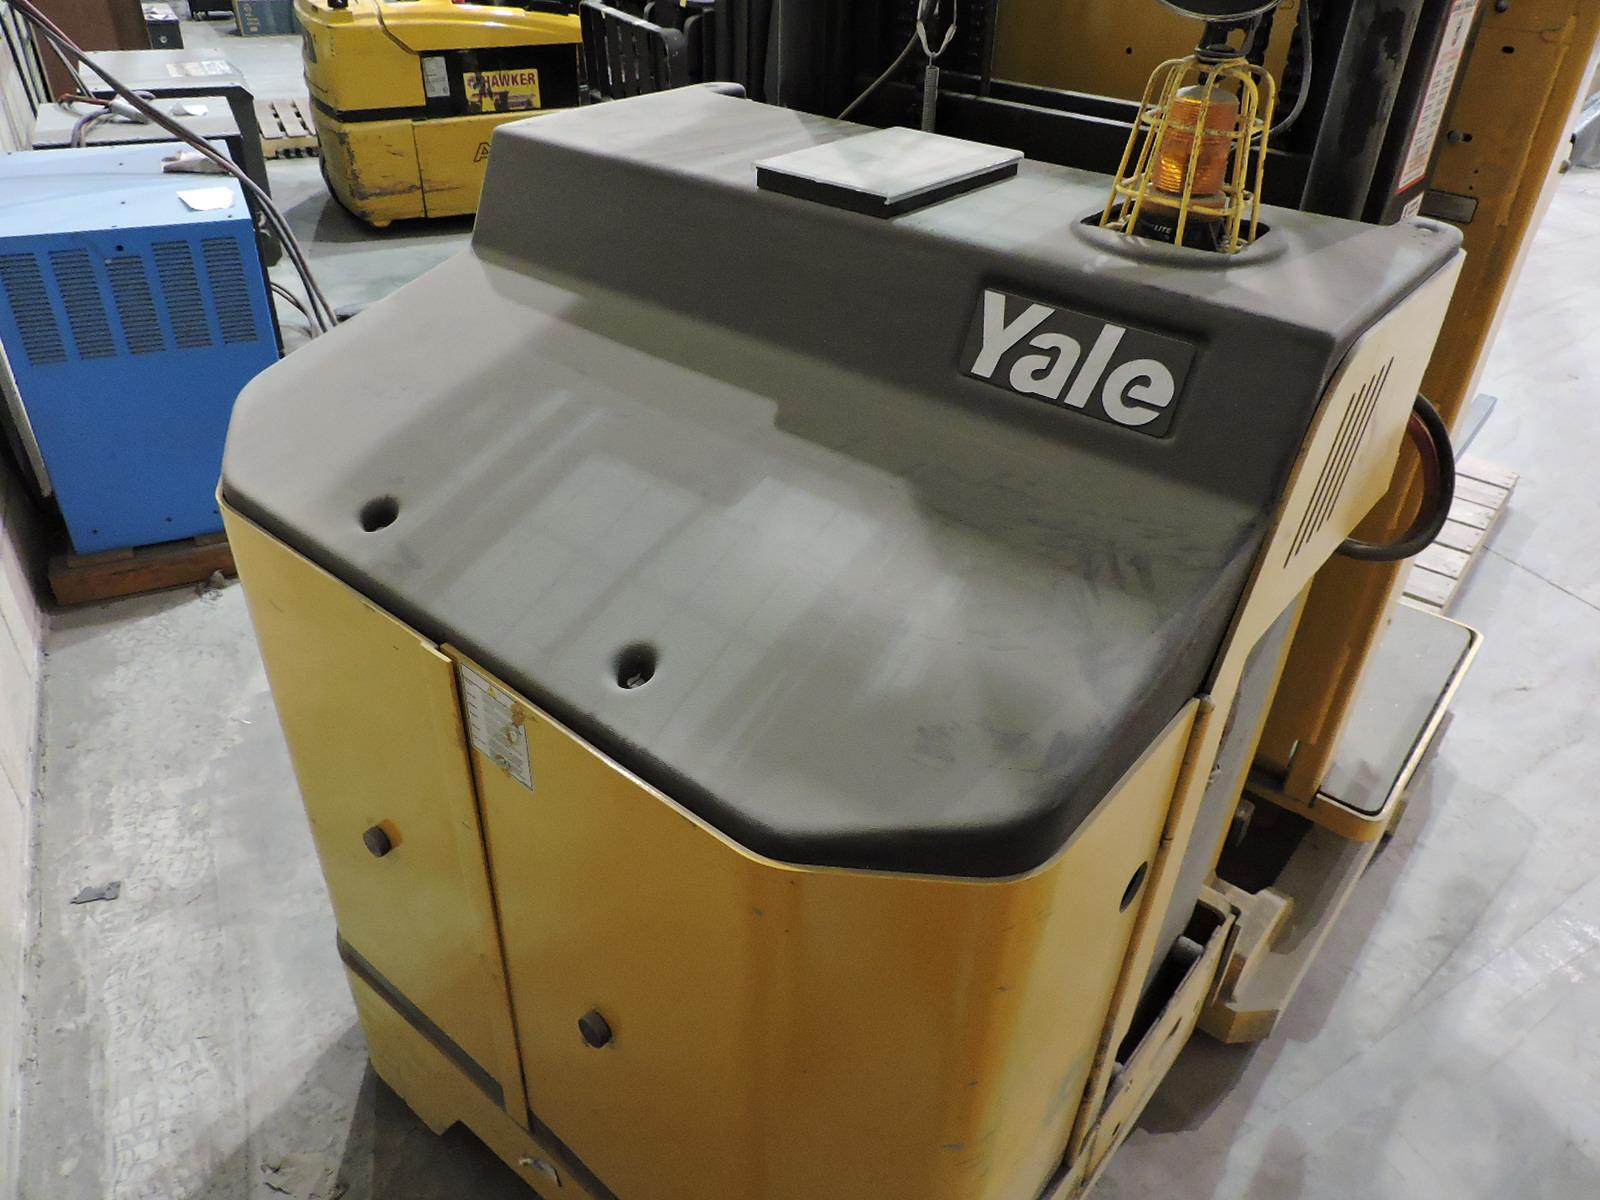 YALE - Electric Stand-Up Fork Truck / Forklift / 3000 LB Capacity